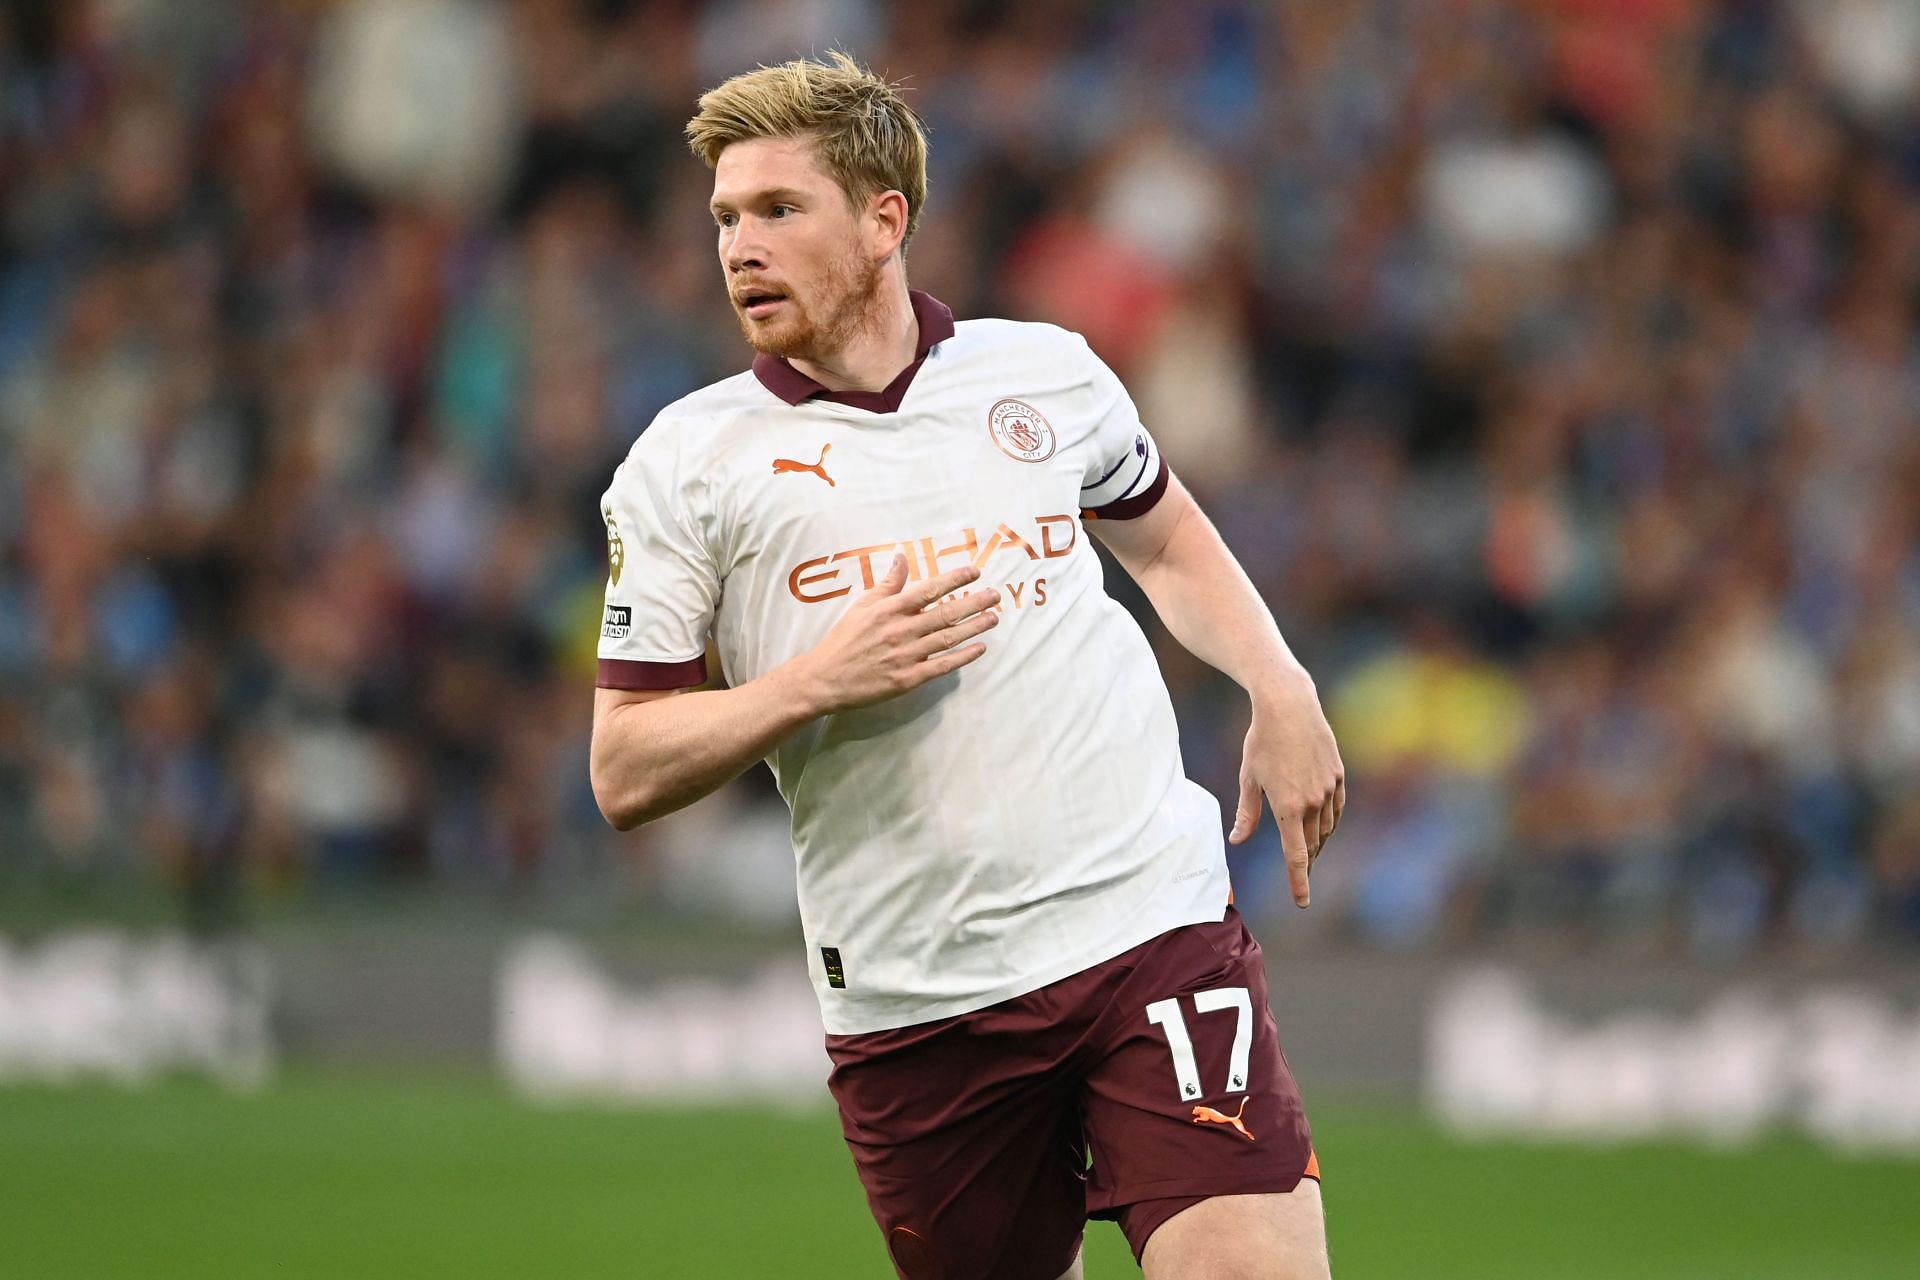 De Bruyne has been exceptional for City